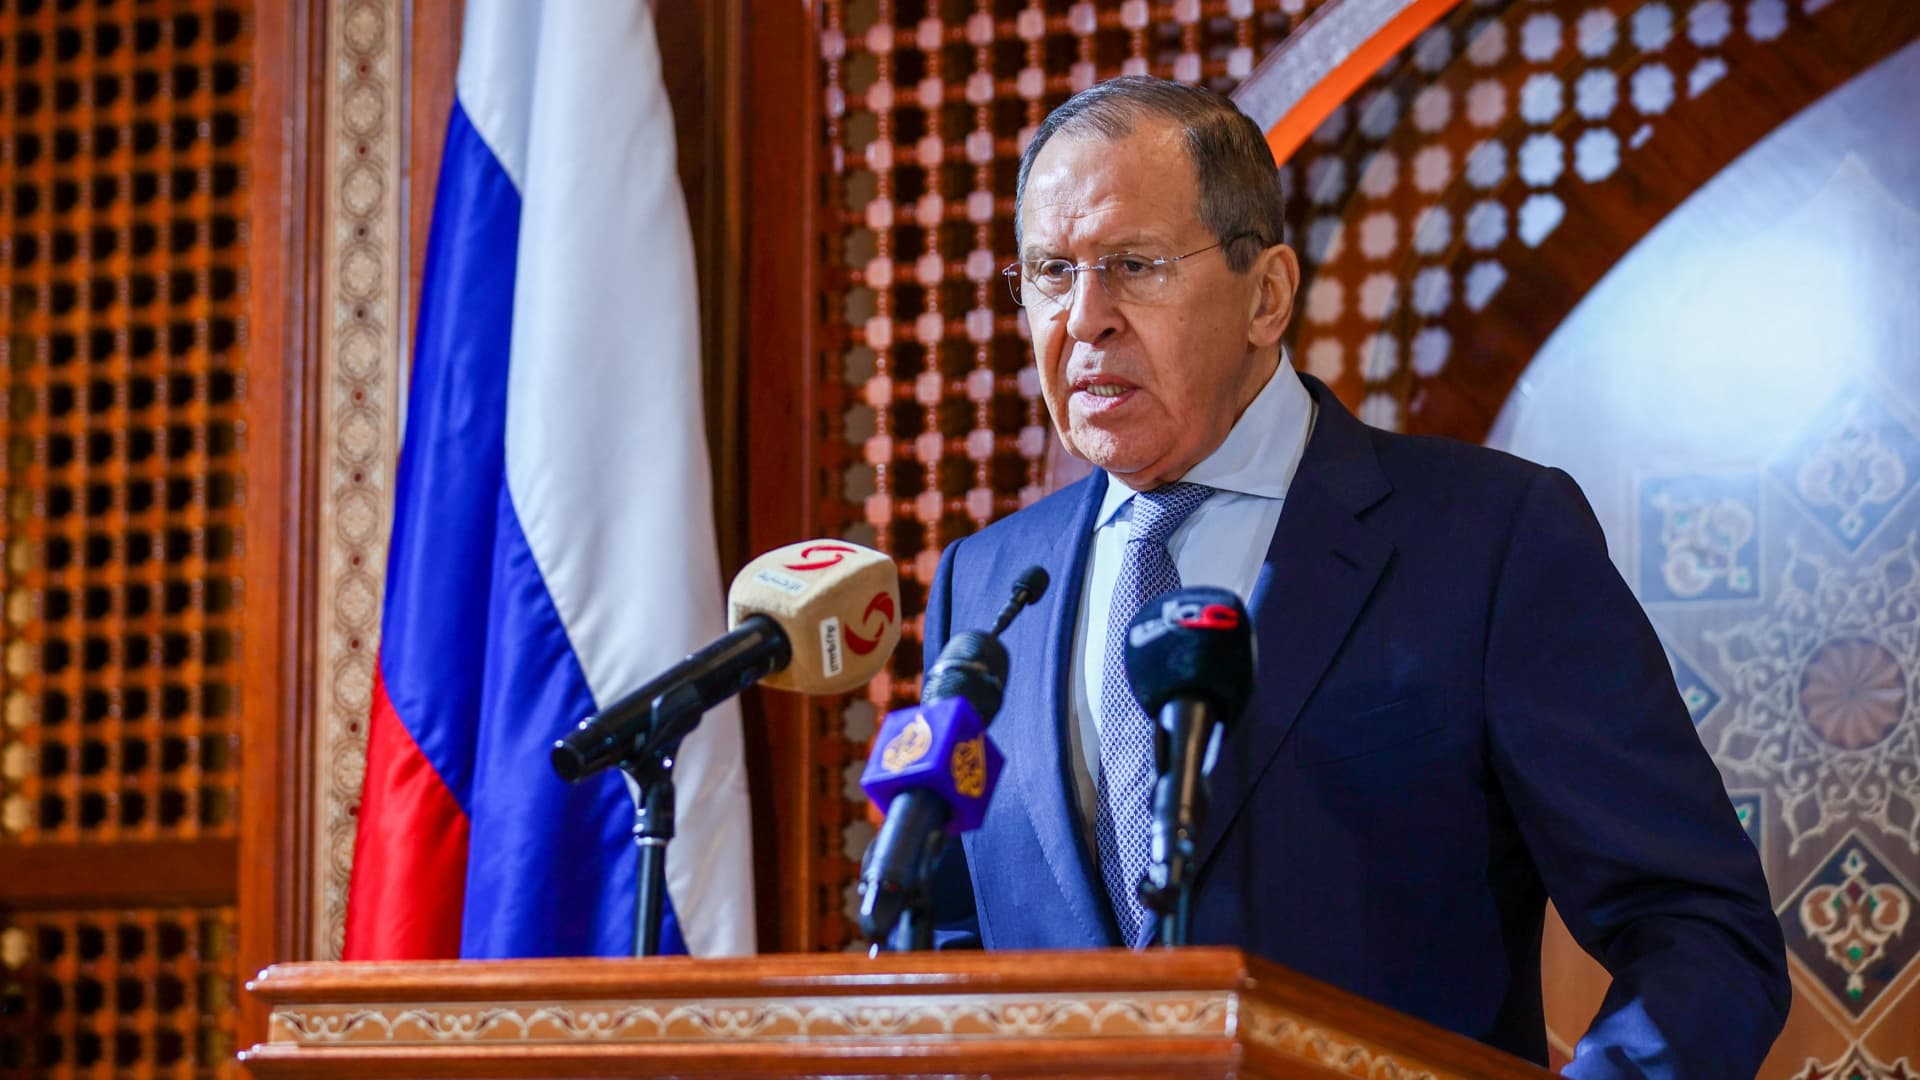 Russian Foreign Minister Sergei Lavrov attends a news conference following talks with his Omani counterpart Badr al-Busaidi in Muscat, Oman, May 11, 2022.